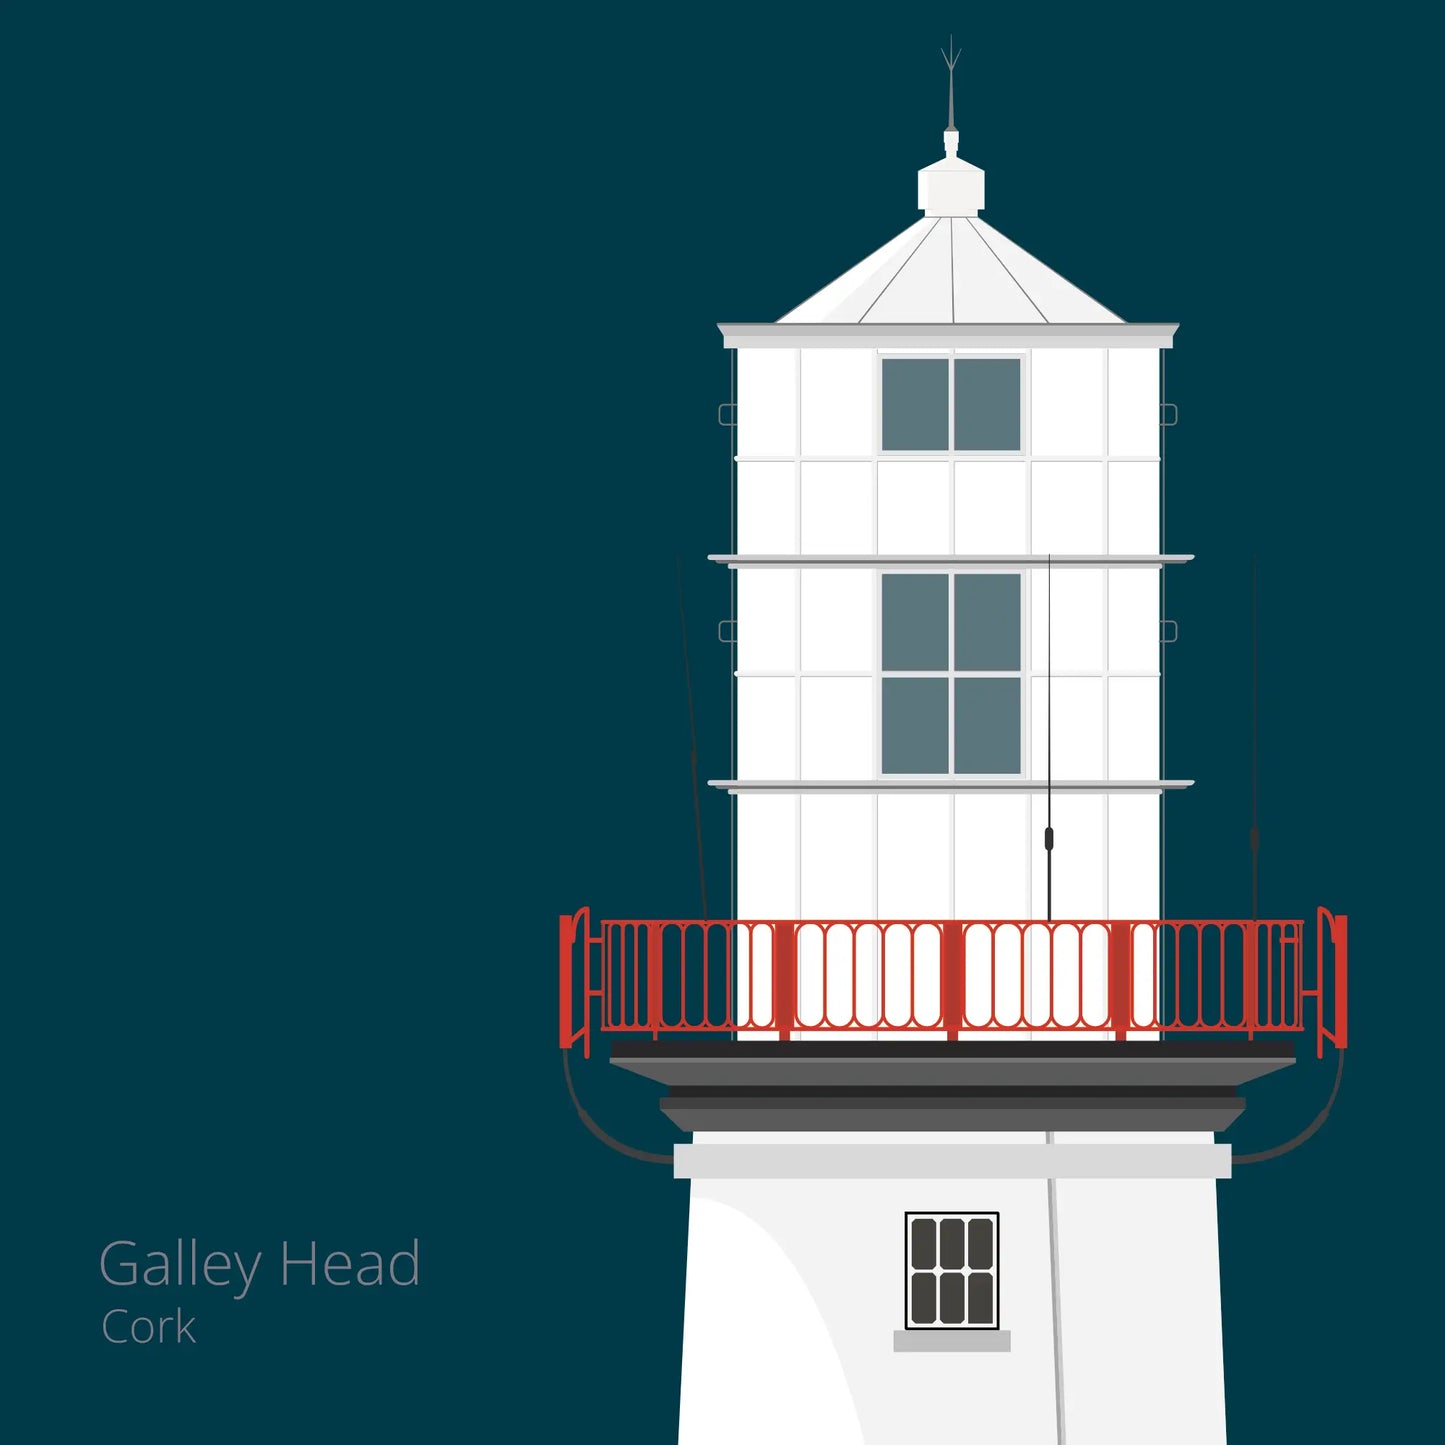 Illustration of Galley Head lighthouse on a midnight blue background